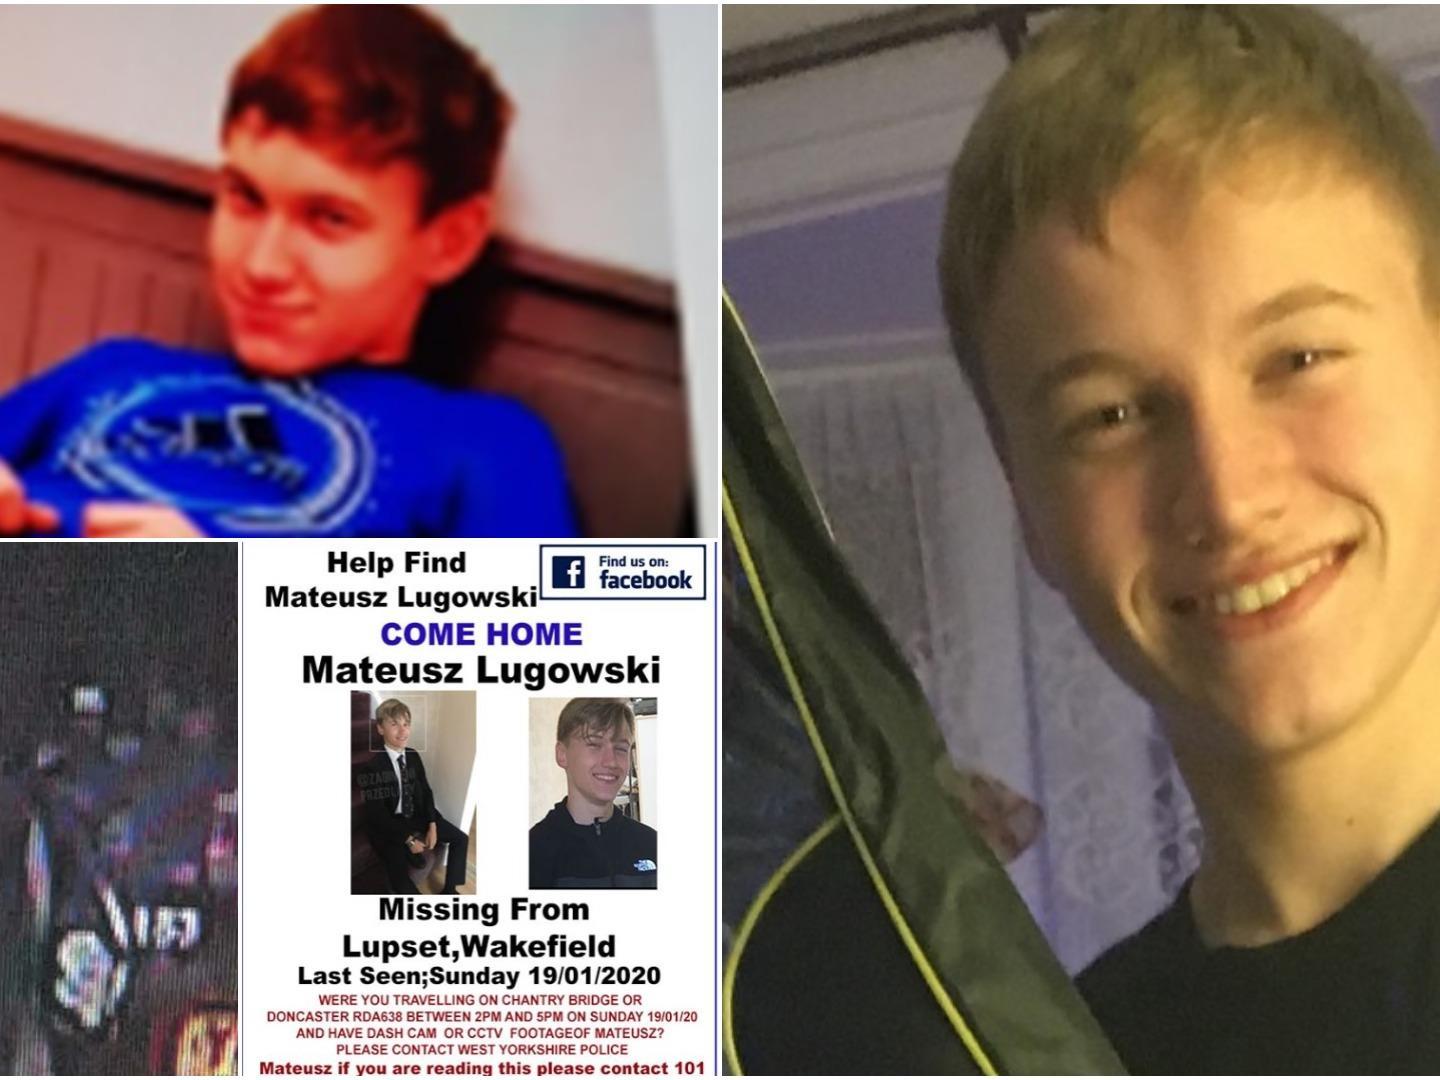 Despite speaking to his friends, family and witnesses, this is the last confirmed sighting of Mateusz.